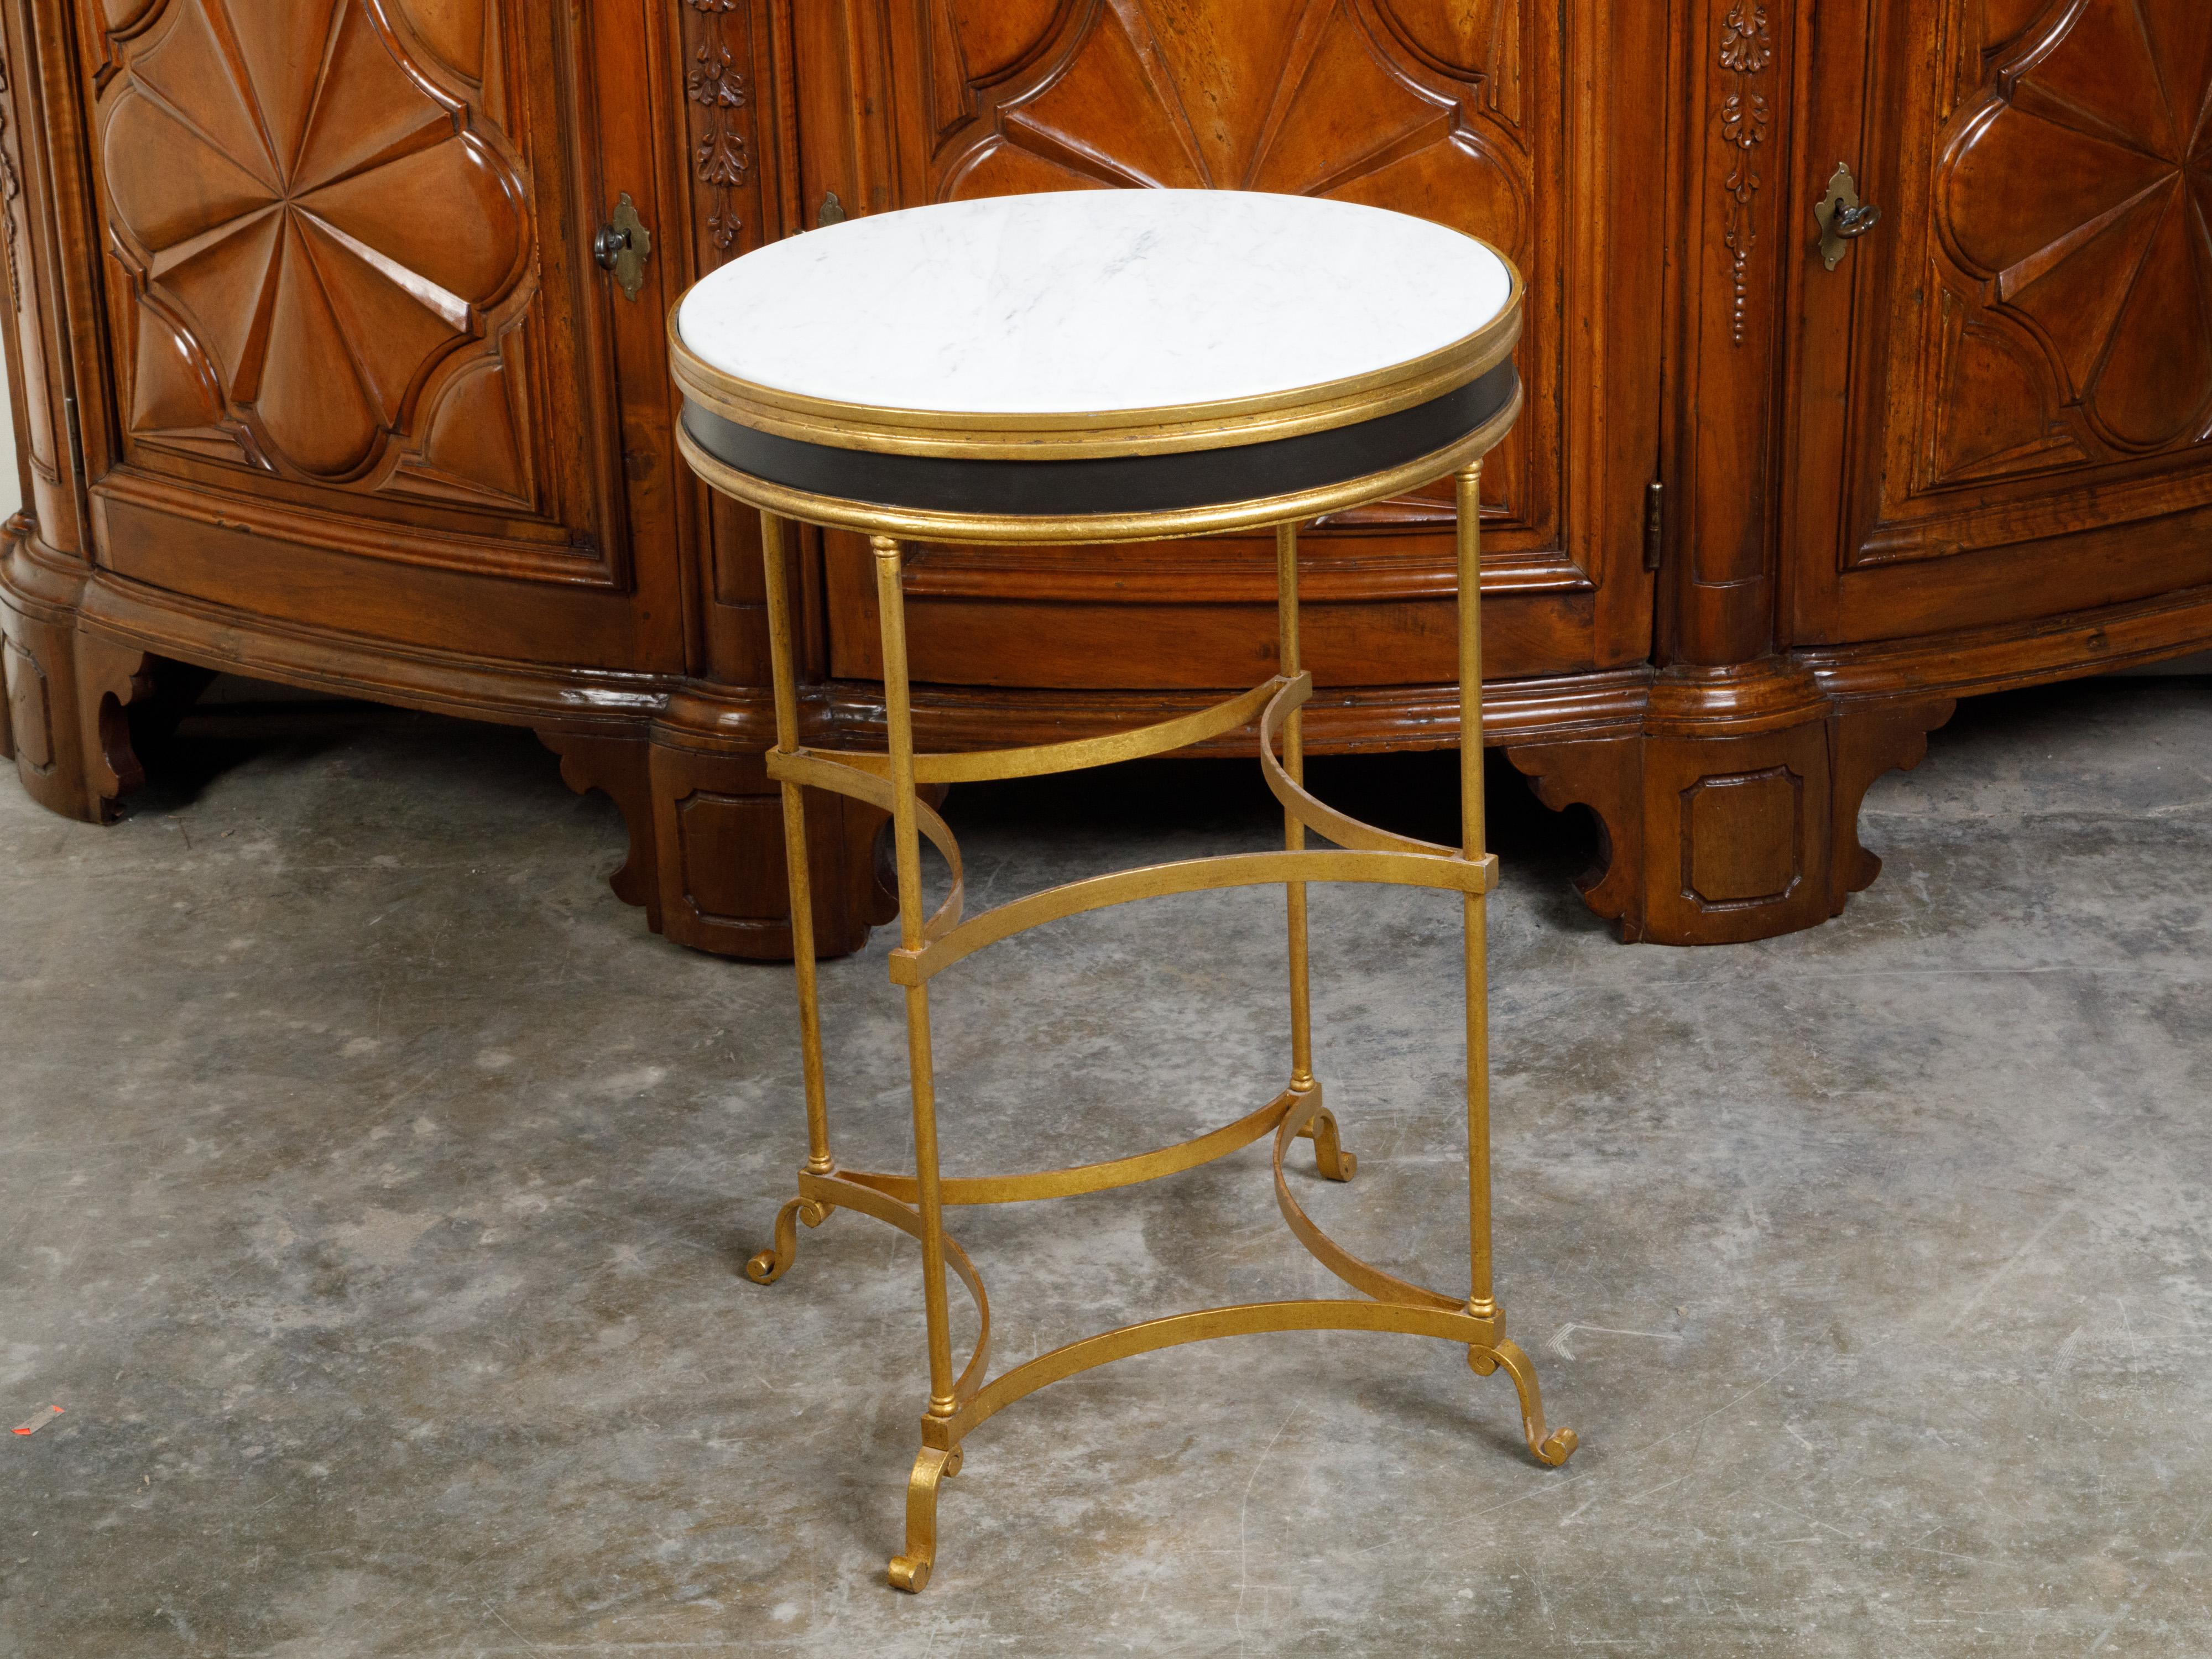 Italian Midcentury Gilt Metal Table with Marble Top and In-Curving Stretchers For Sale 2